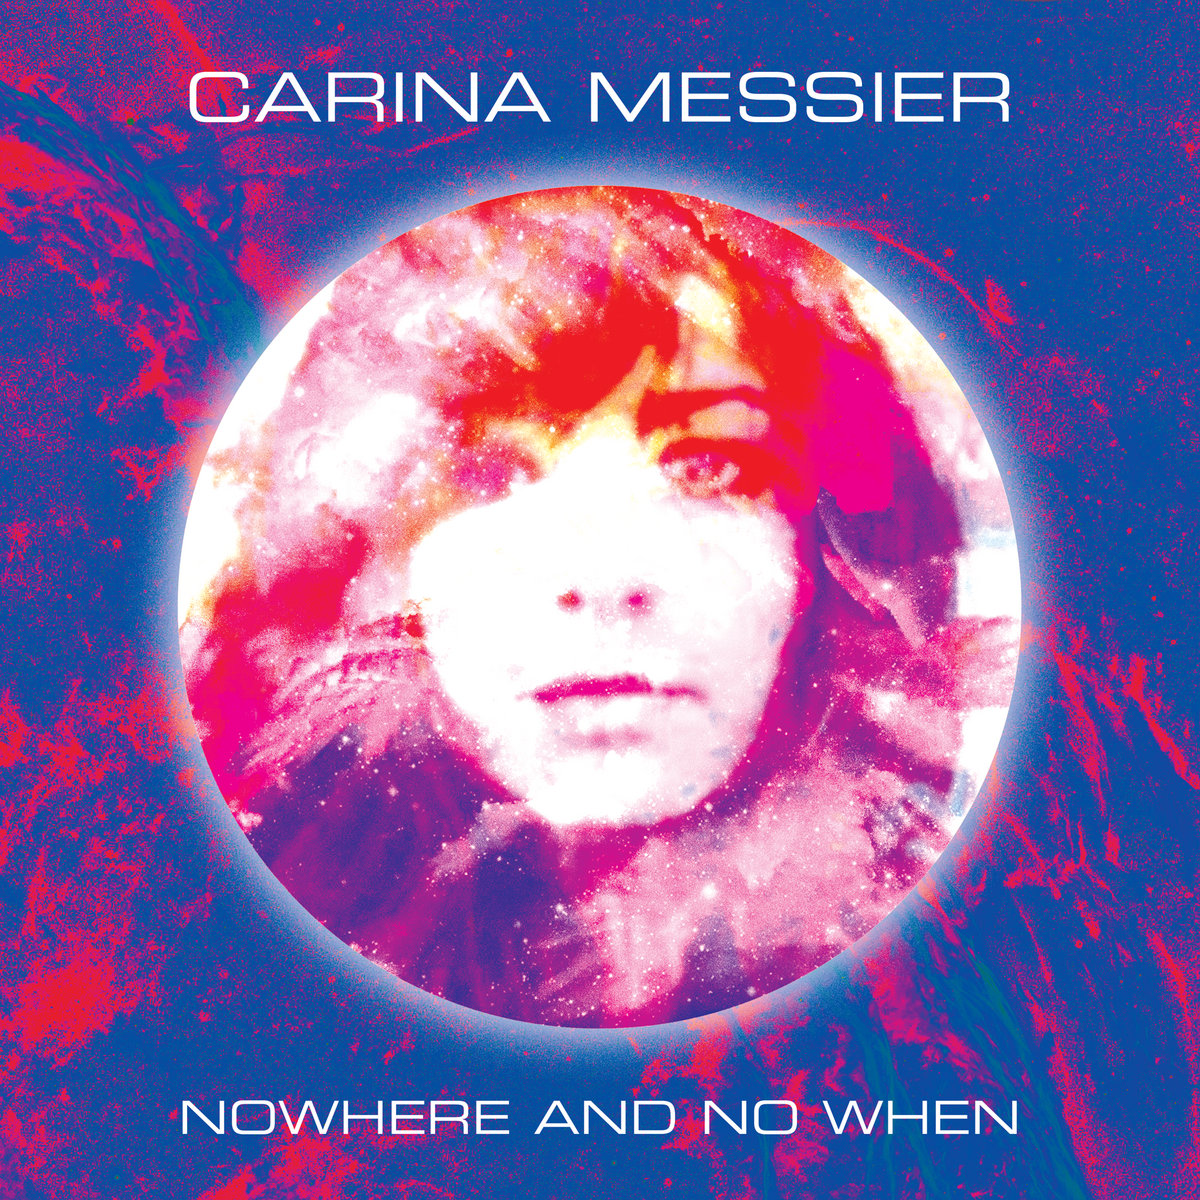 Cover of Nowhere and No When by Carina Messier.